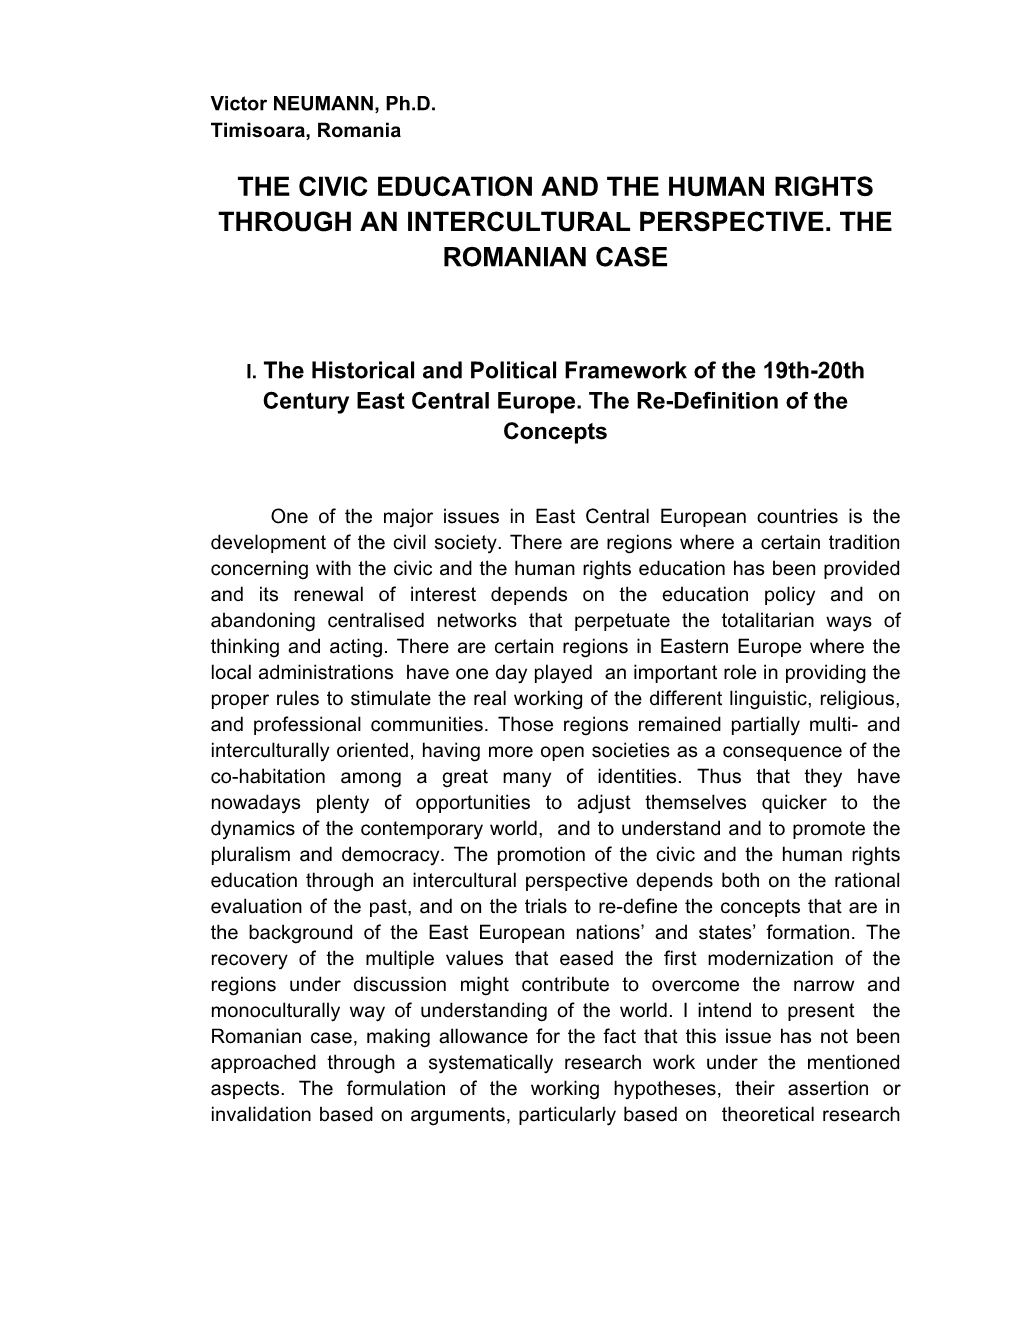 The Civic Education and the Human Rights Through an Intercultural Perspective. the Romanian Case